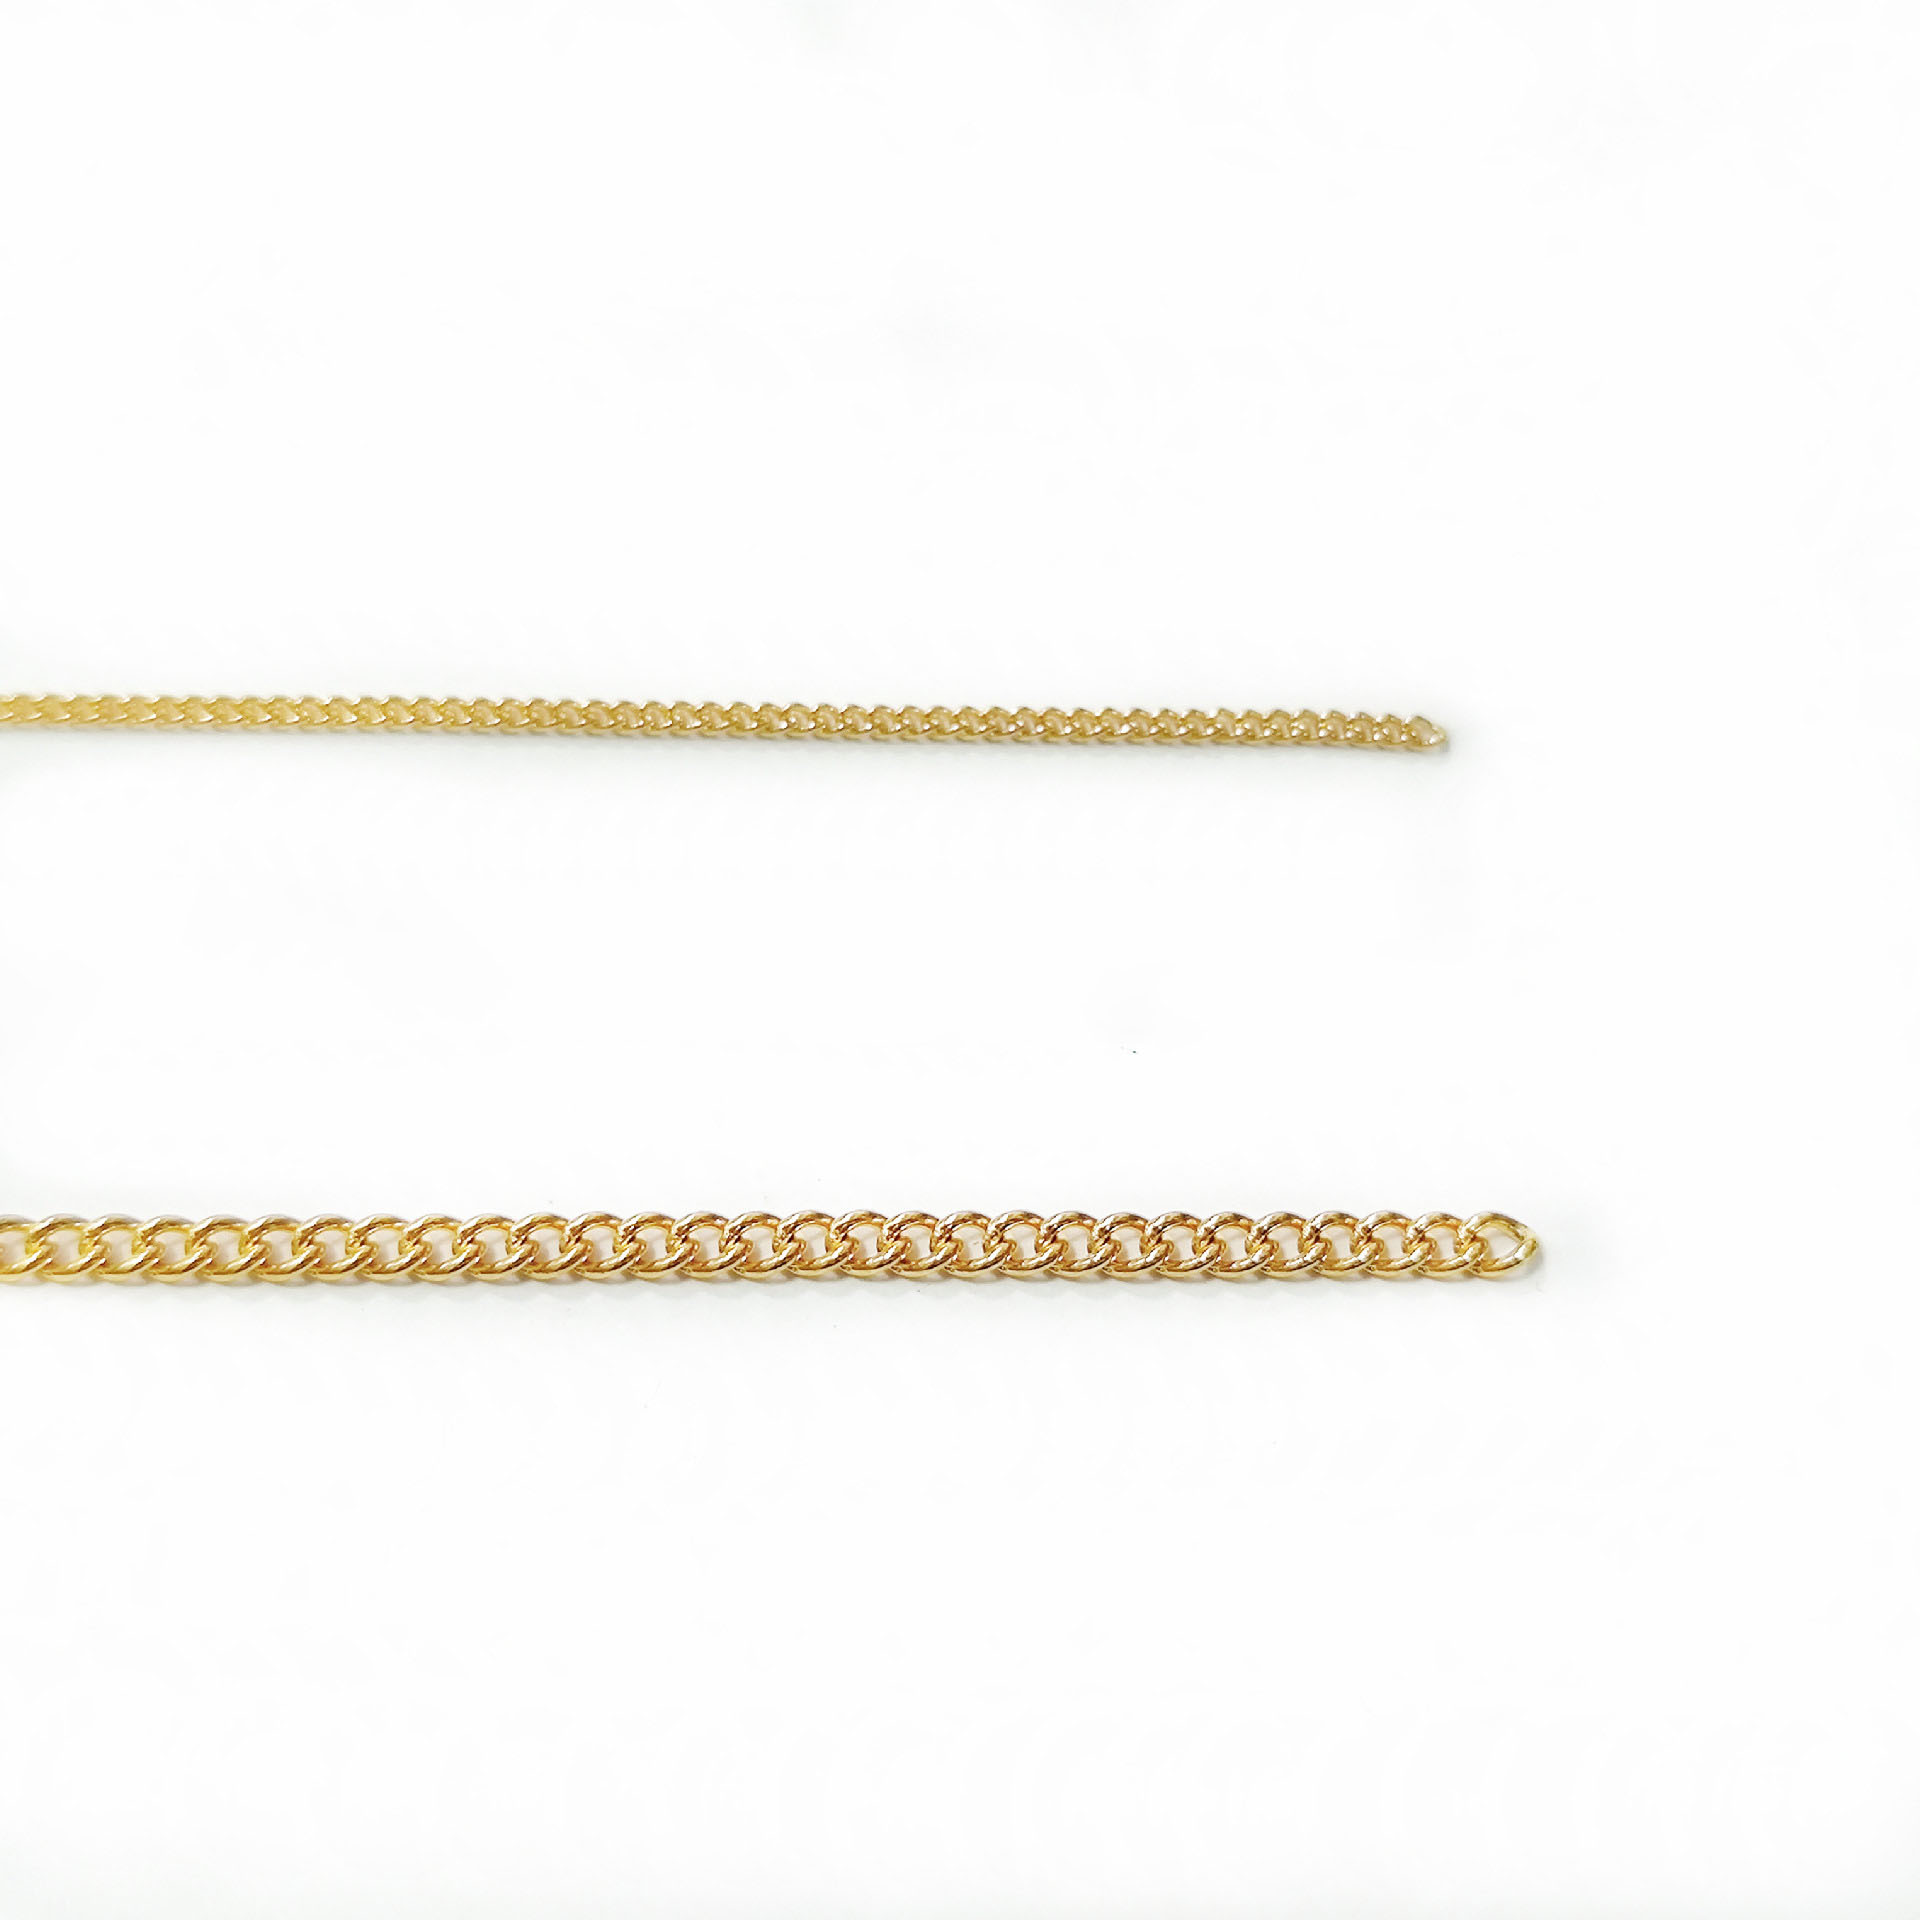 0.8 line*chain width 3mm gold